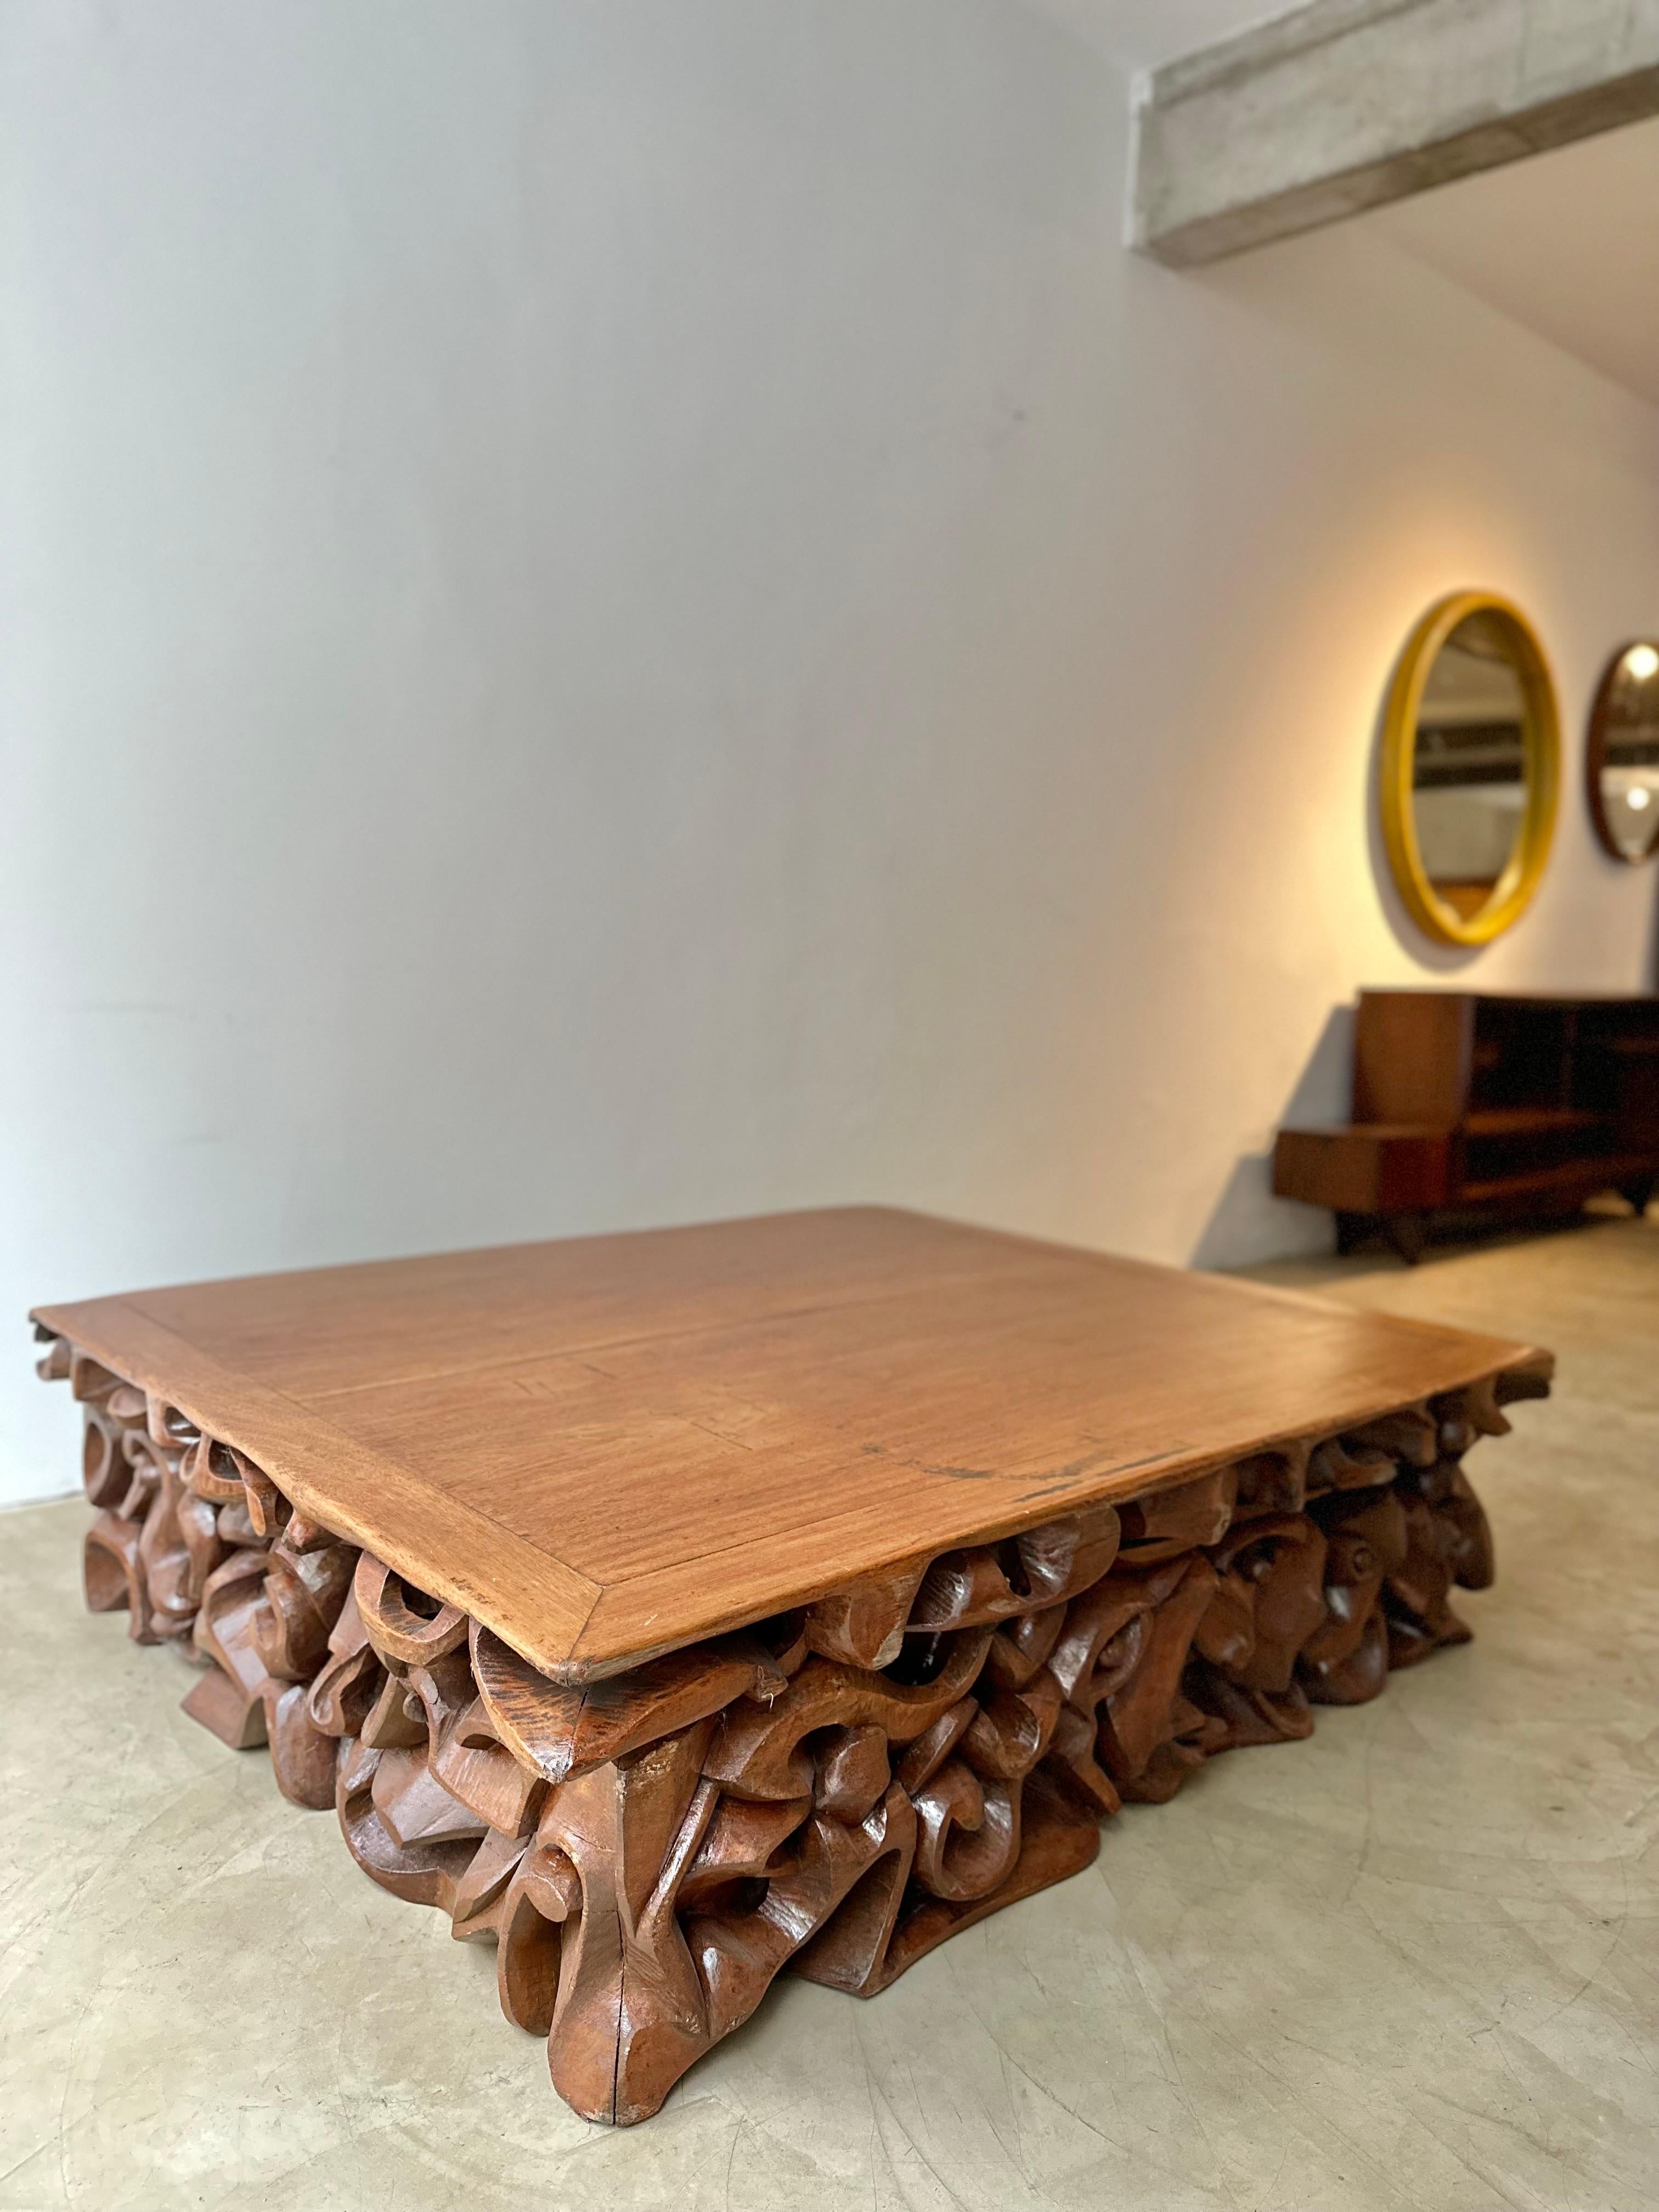 C.A Paudalho. Artisan Center Table in Wood In Good Condition For Sale In Sao Paulo, SP